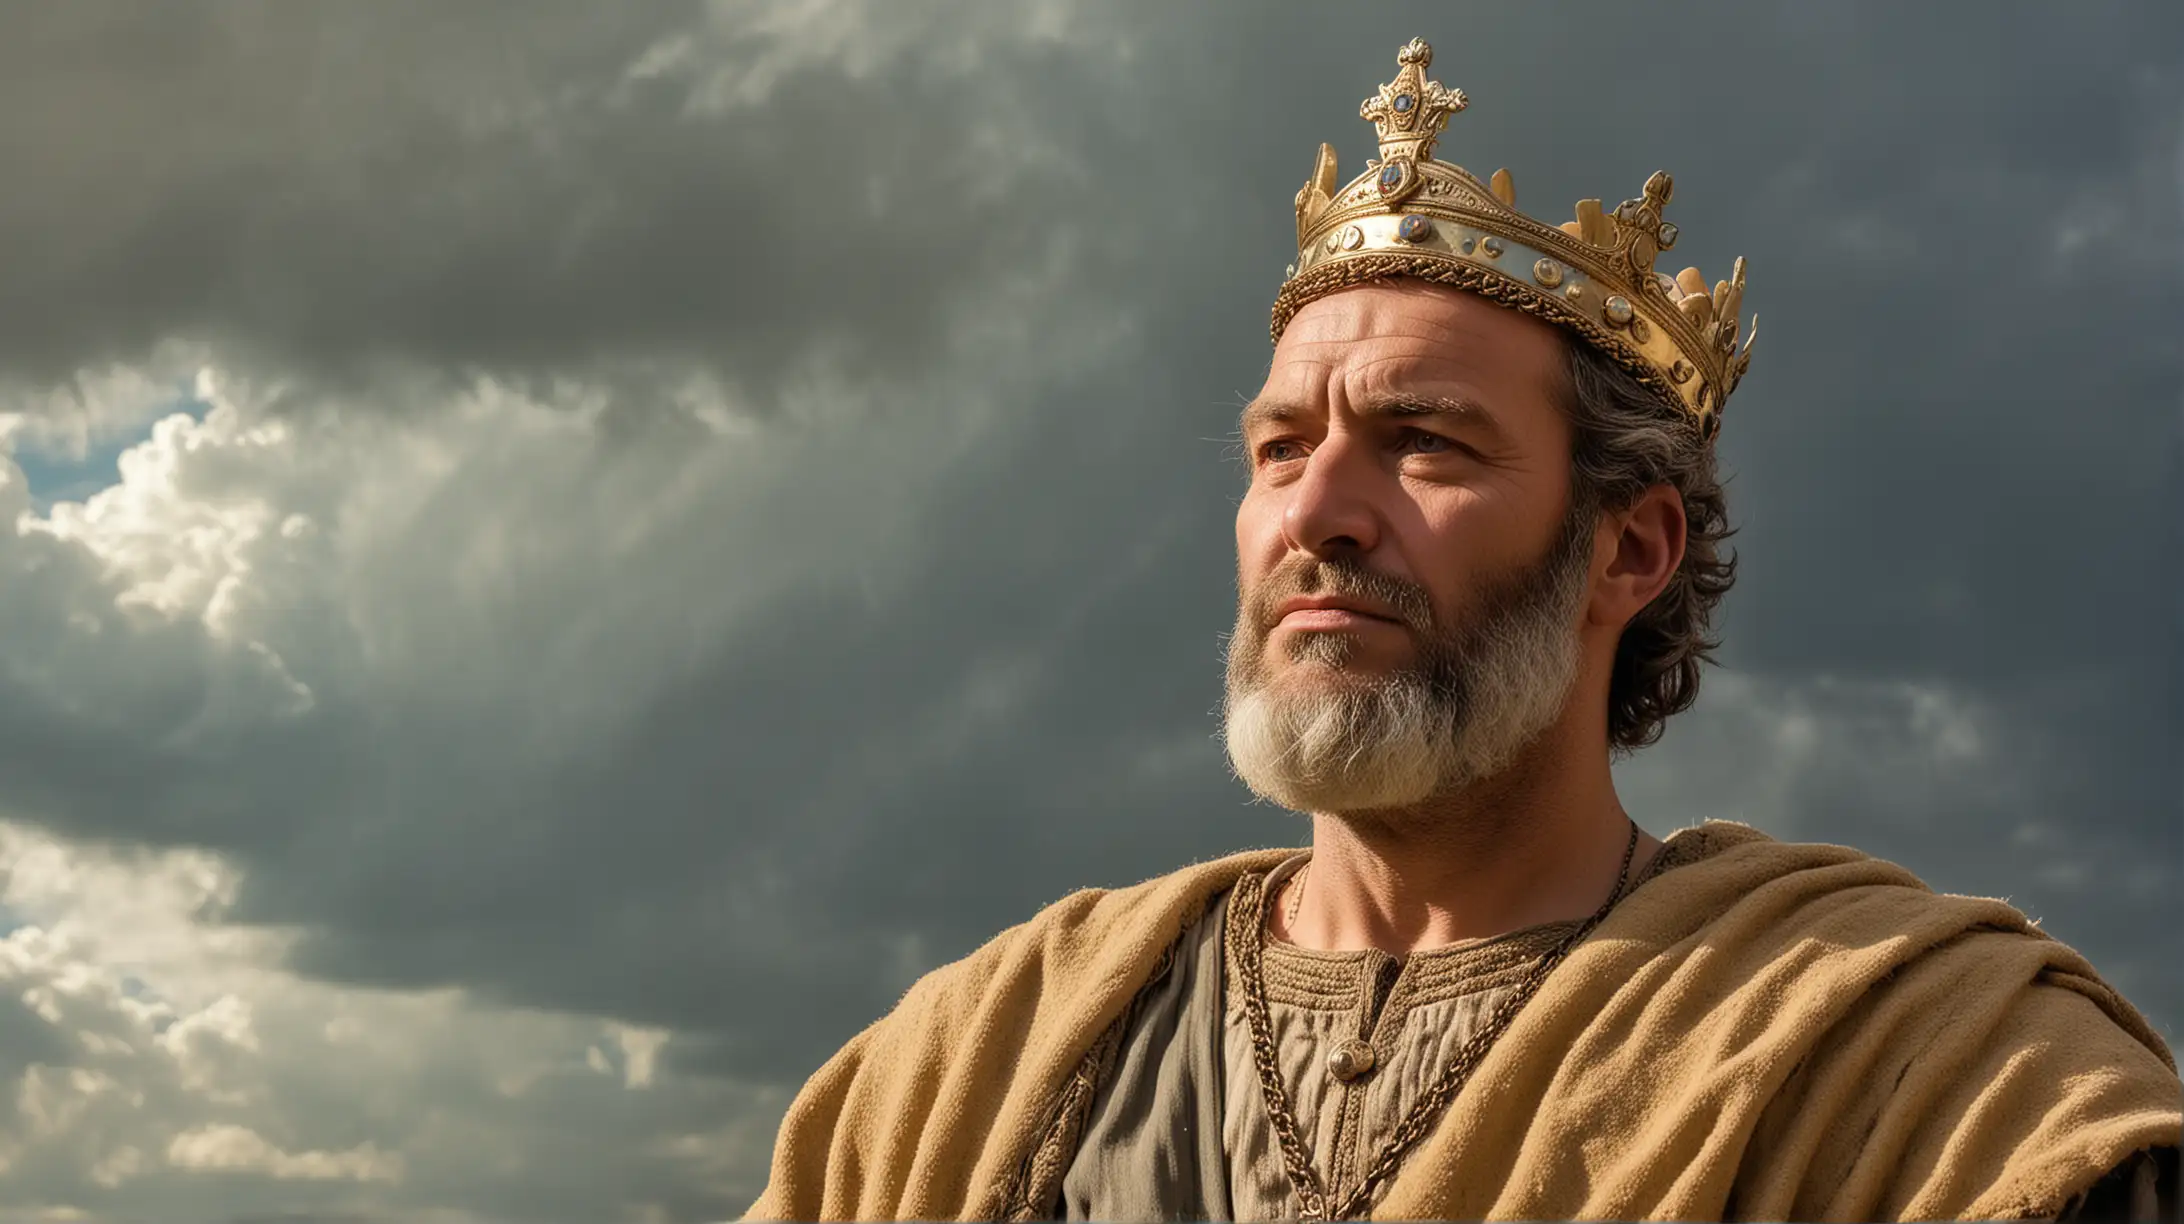 a Tall handsome 40 year old king Saul with a crown, beside an old man of average height in front on a crowd, in town, with a magnificent sky in the background Set during the Biblical era of King David.